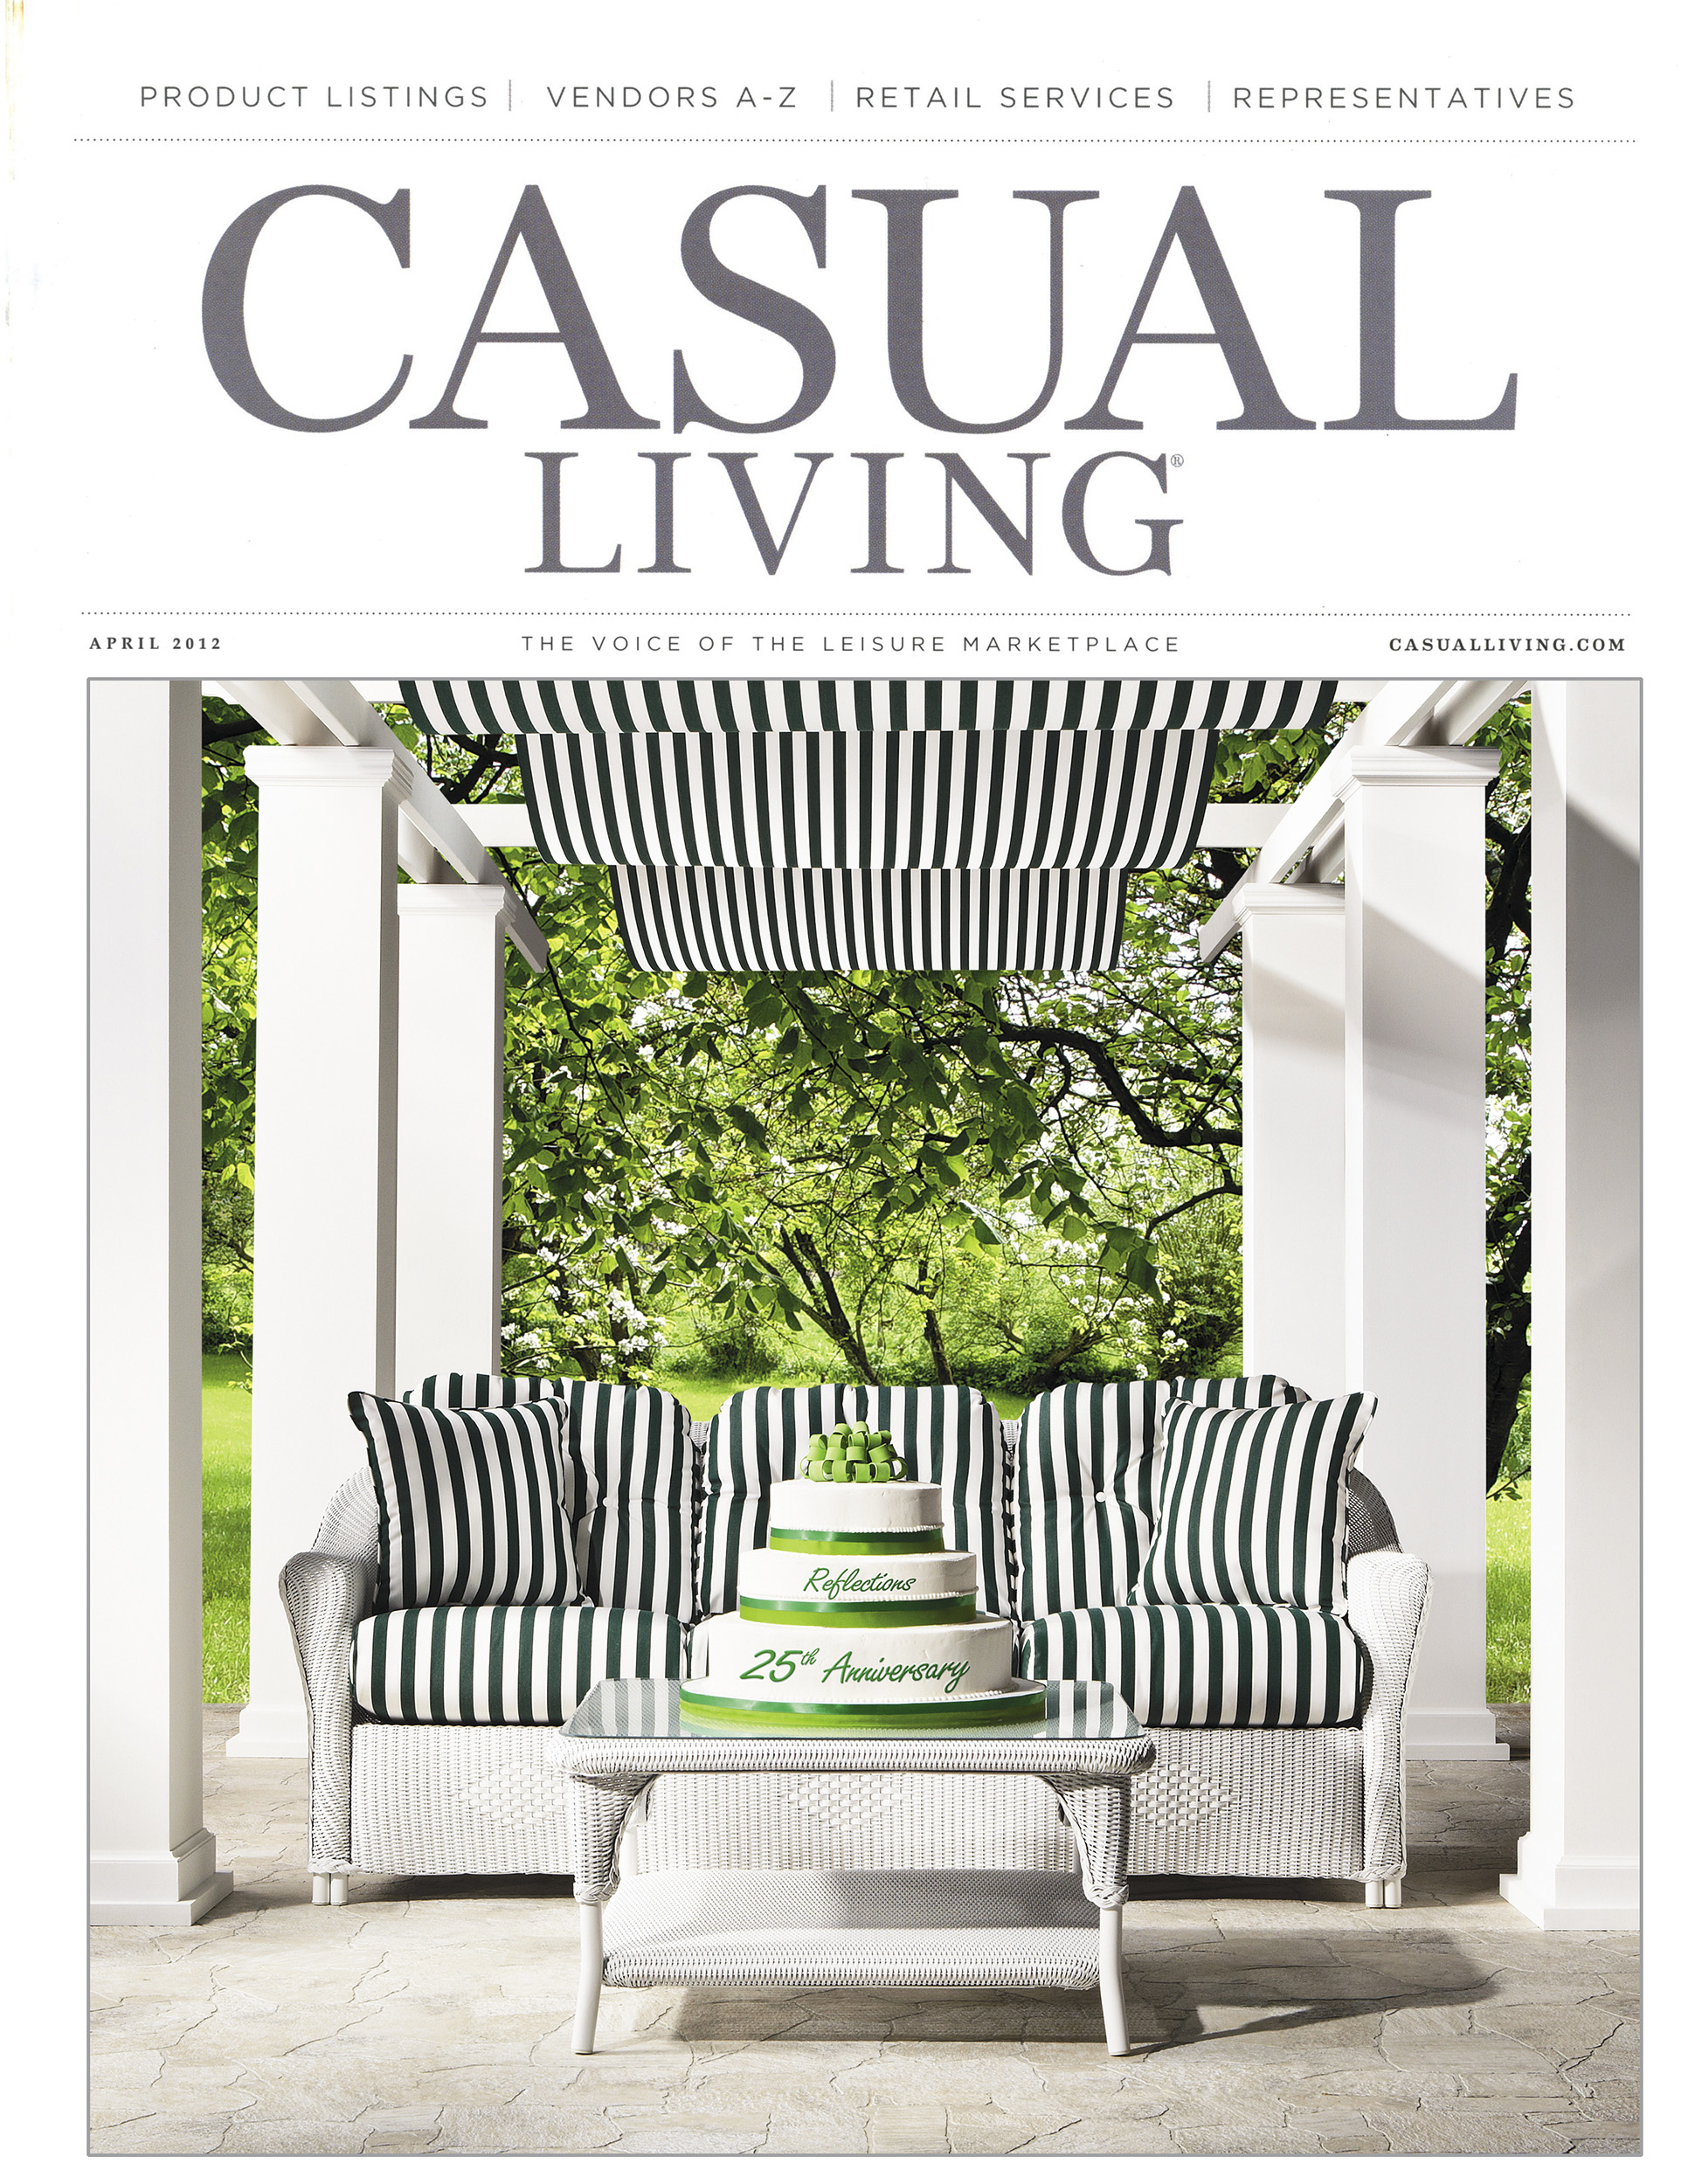 Outdoor furniture photographed for Casual Living Magazine Cover